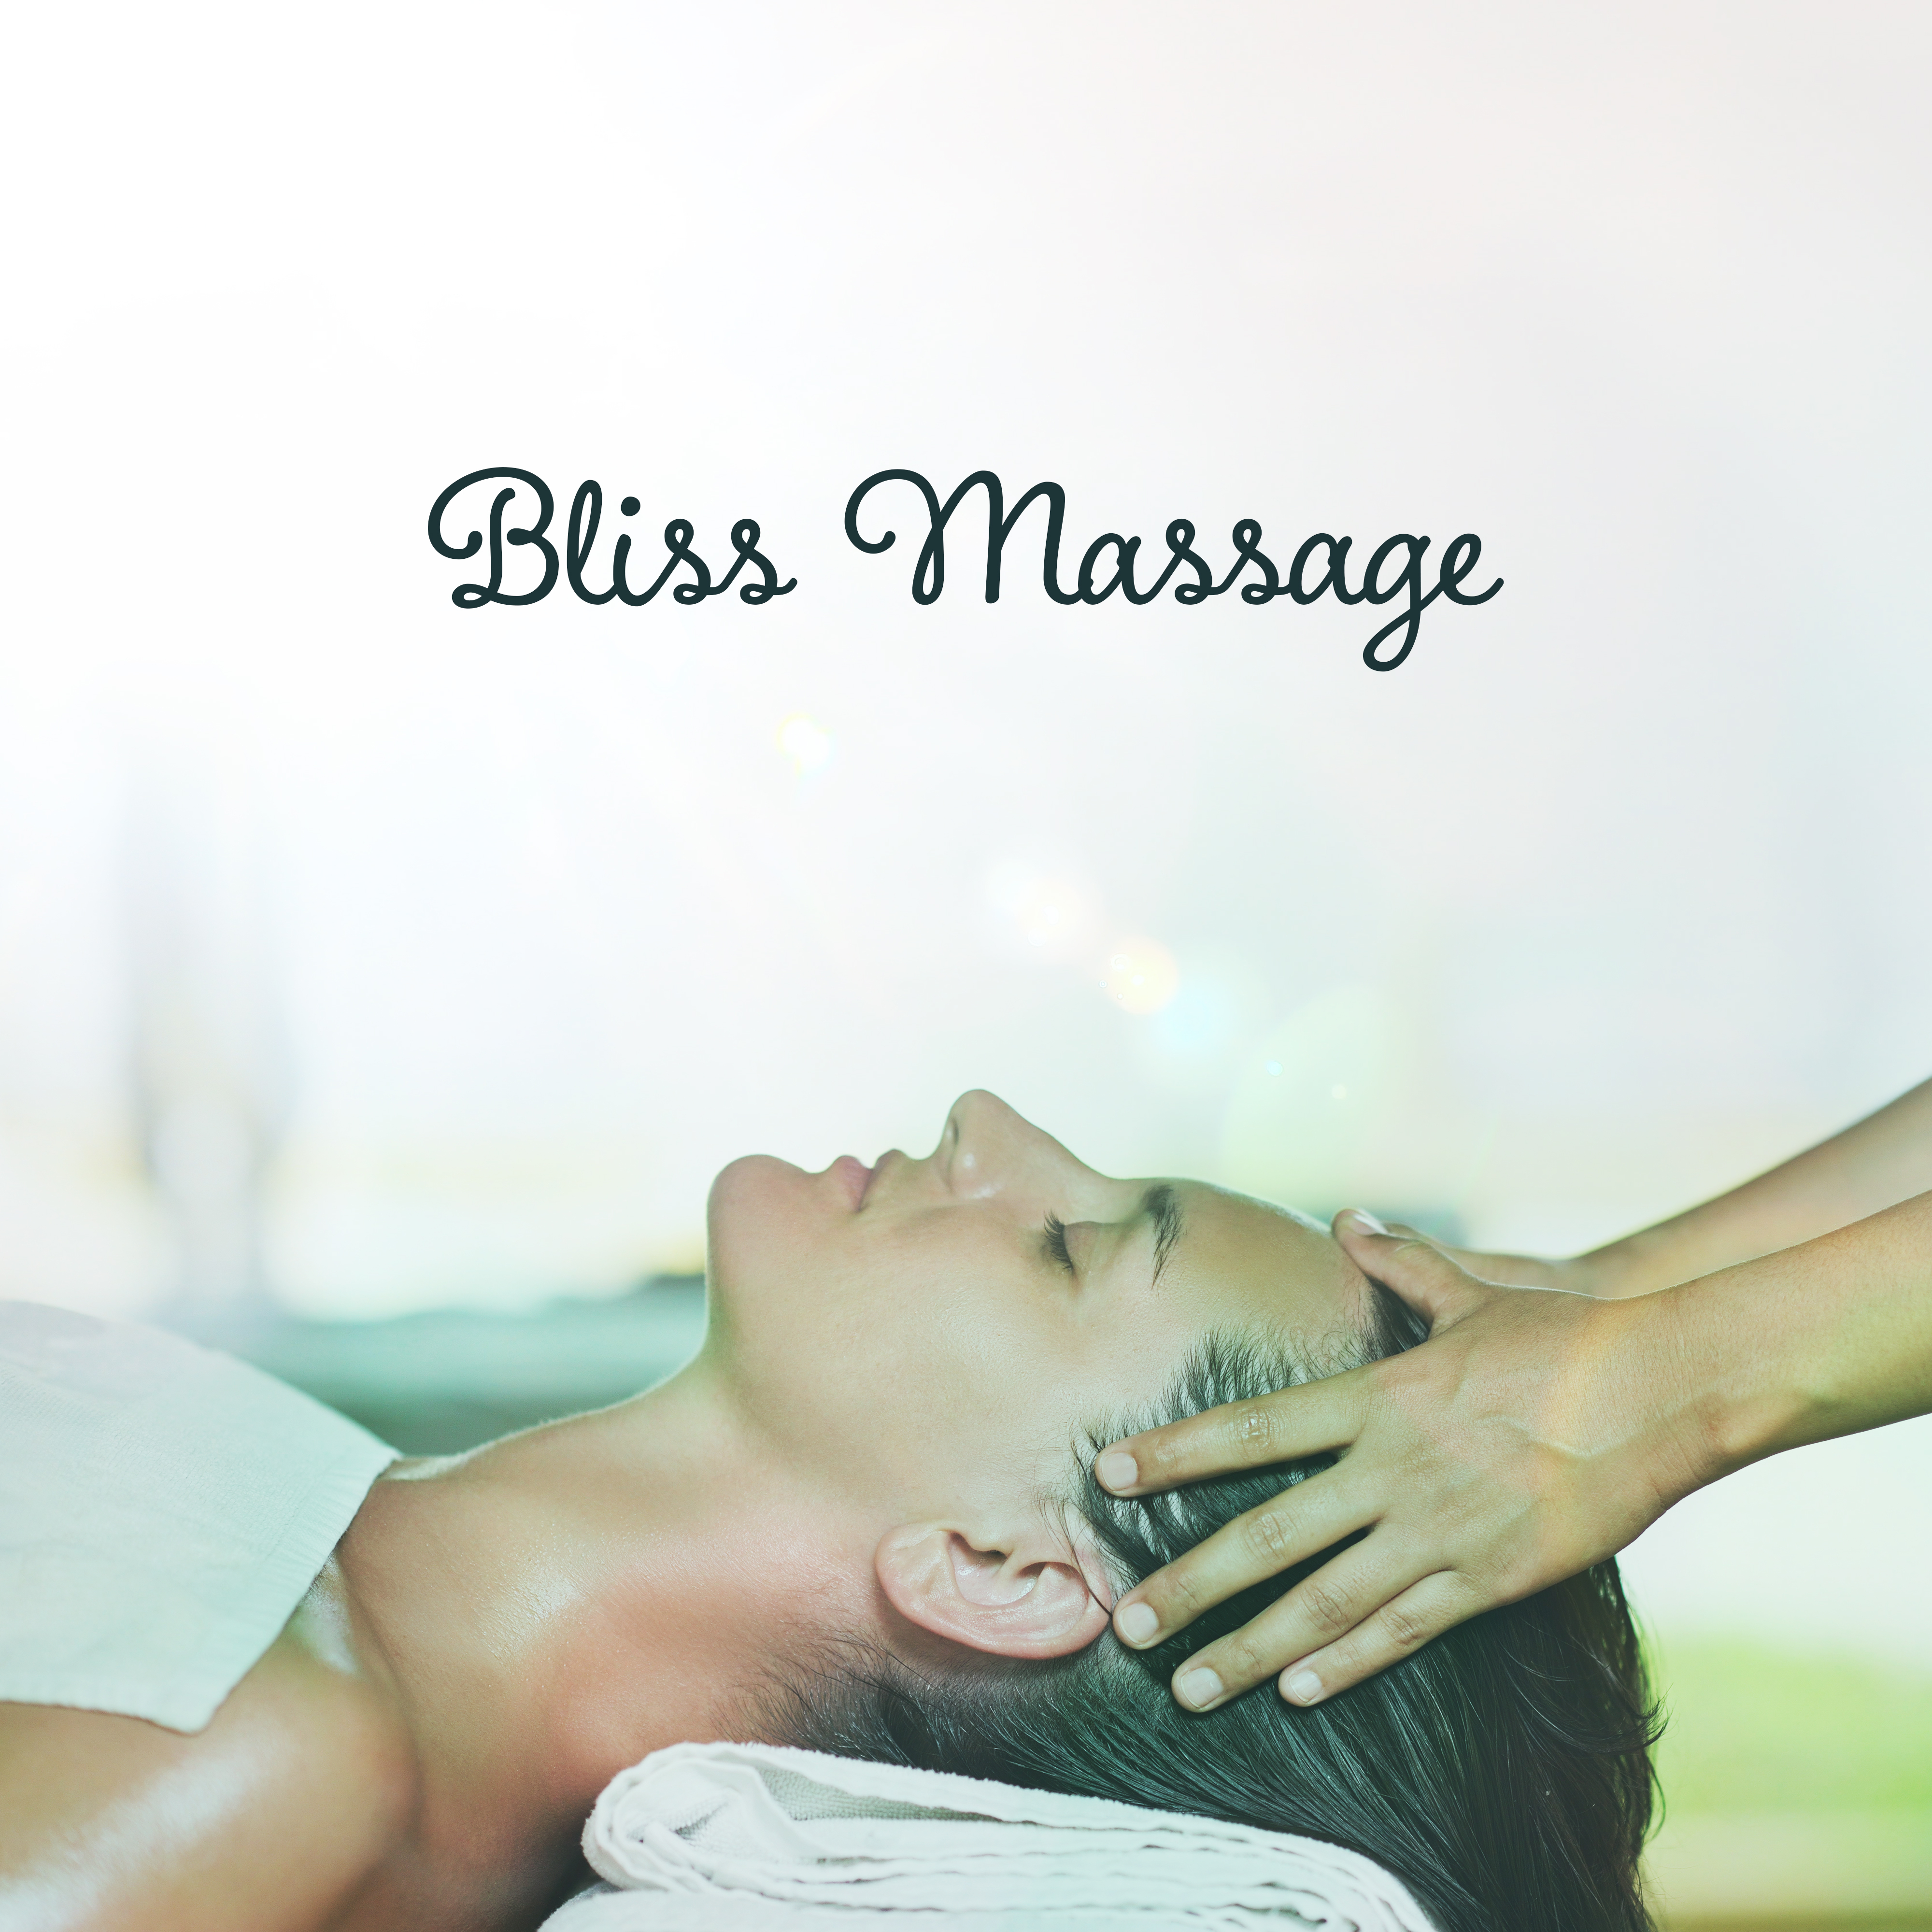 Bliss Massage  Peaceful Sounds of Nature, Music for Hotel Spa, Beauty Parlour, Spa at Home, Relax